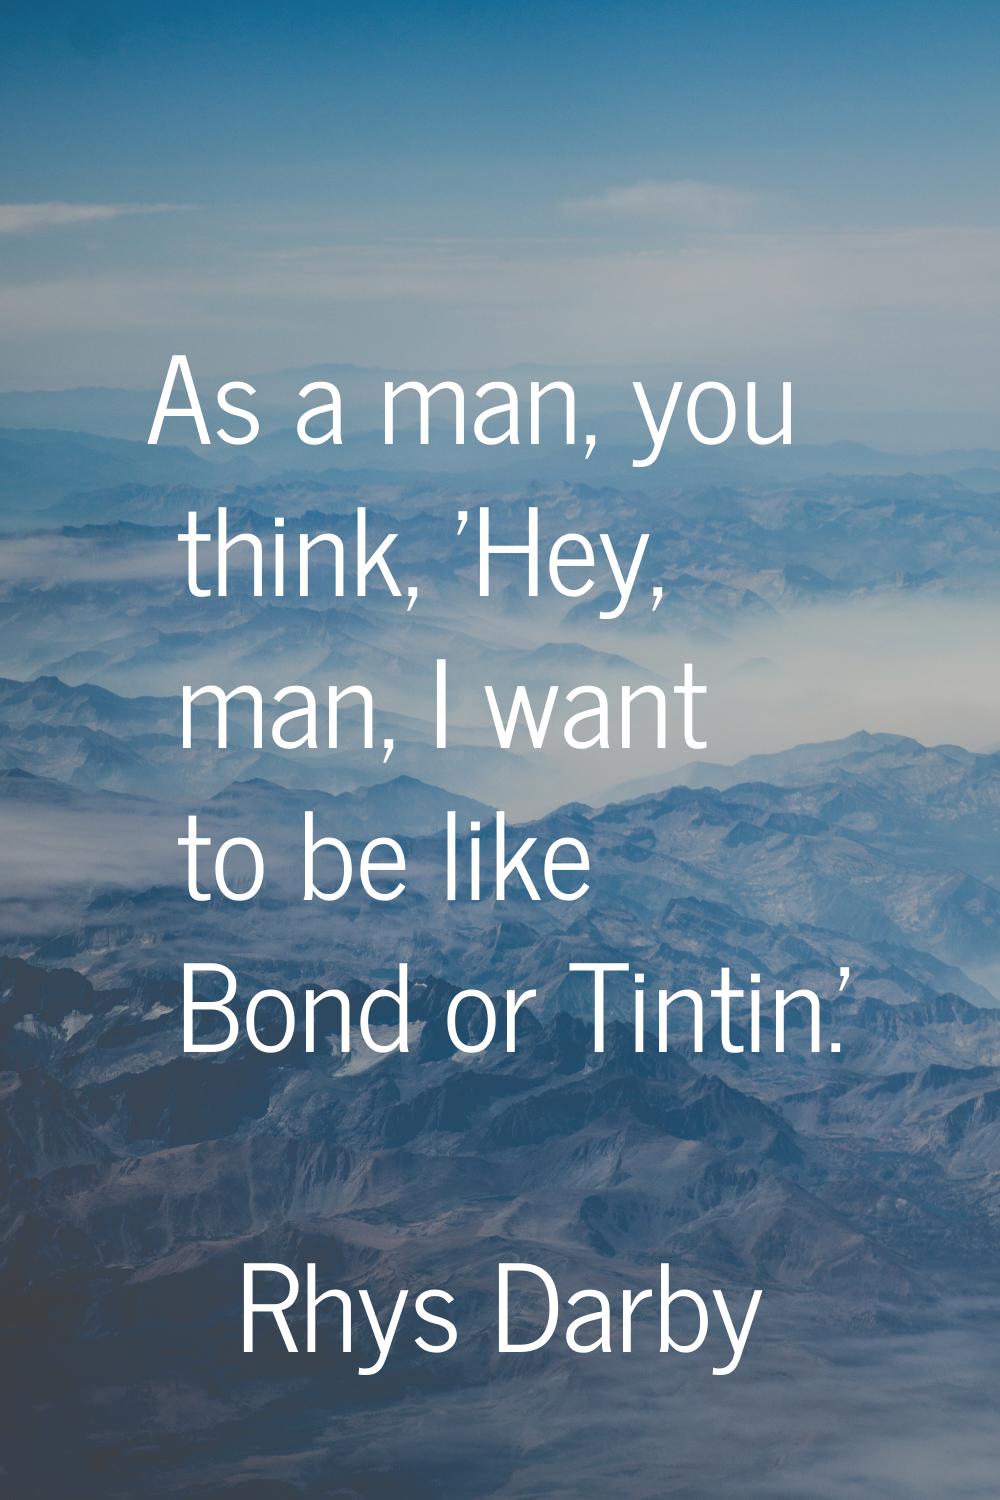 As a man, you think, 'Hey, man, I want to be like Bond or Tintin.'